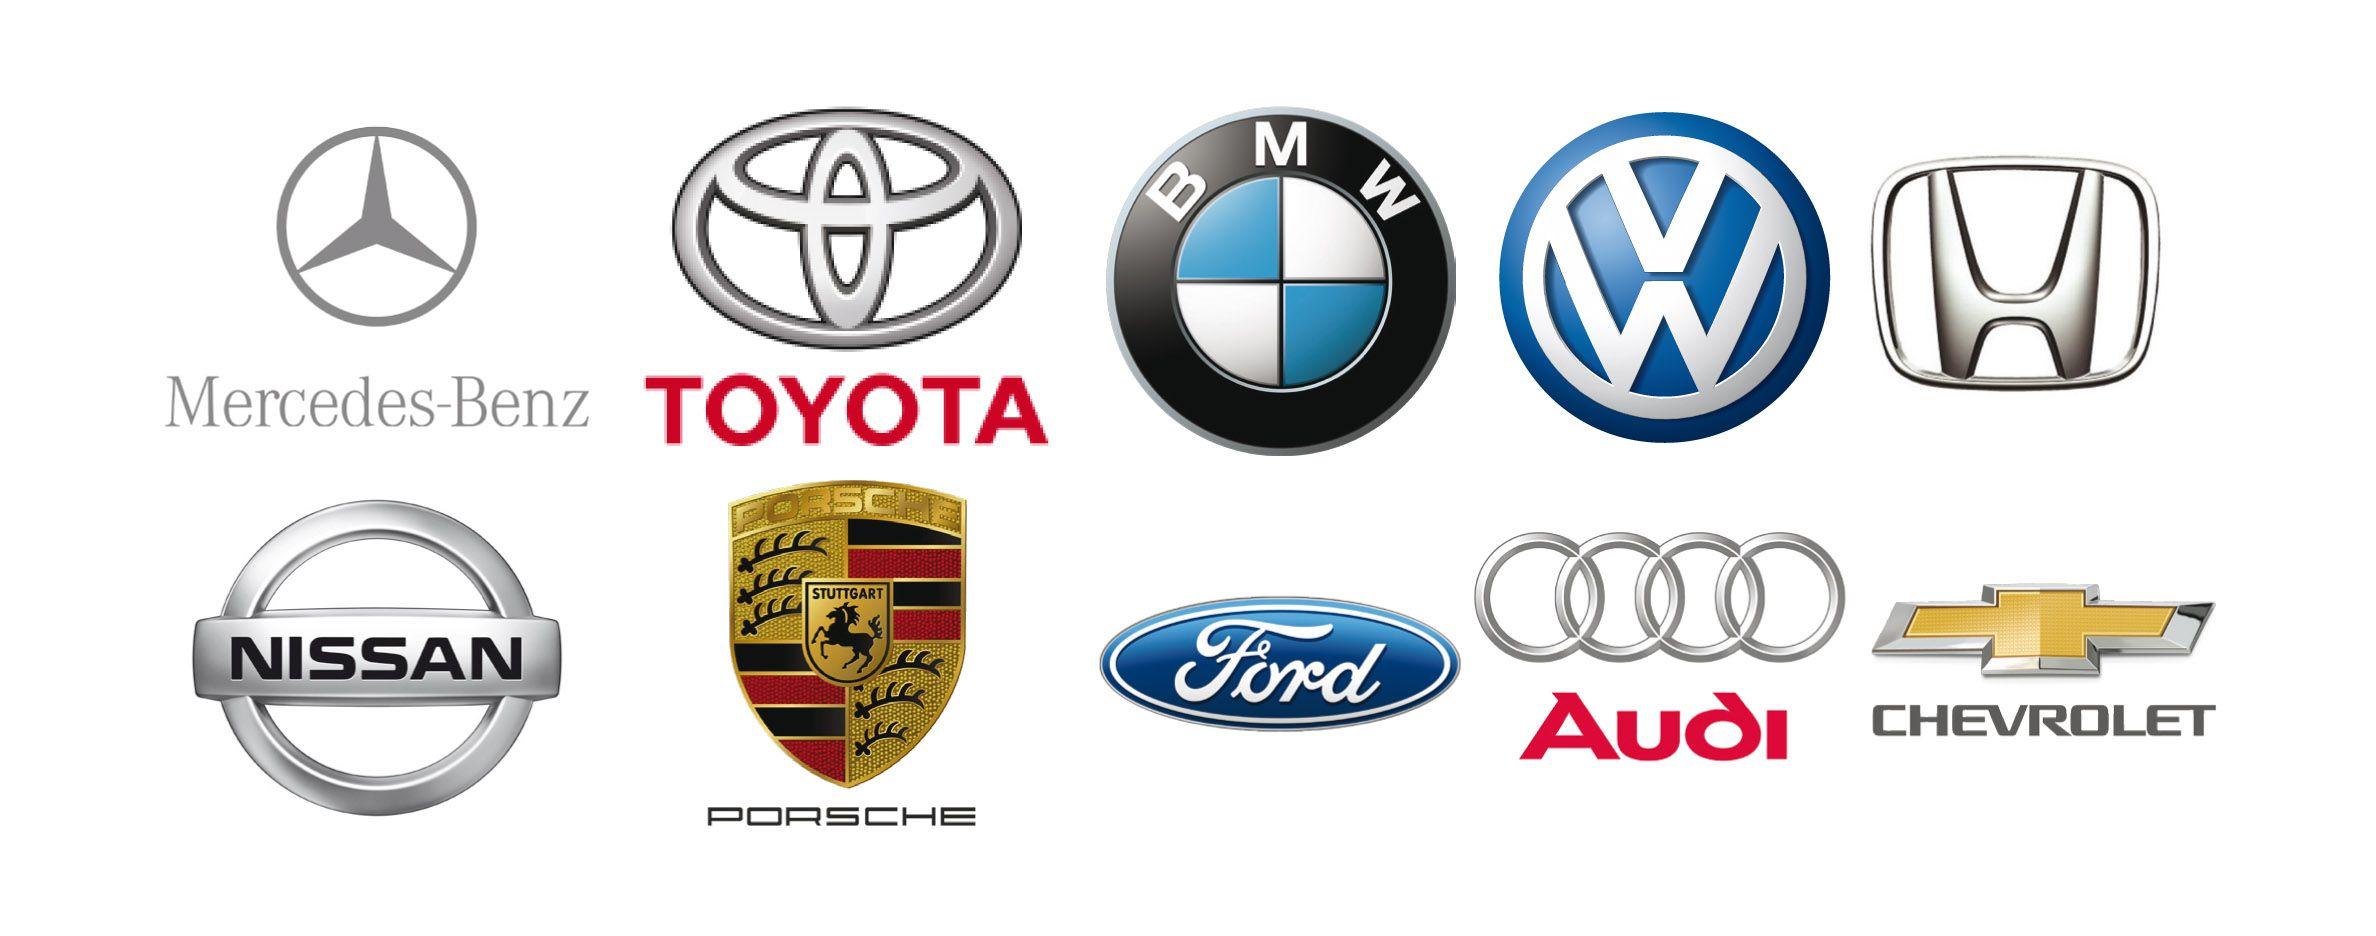 Automotive Company Logo - Mercedes-Benz is 2018's most valuable car brand